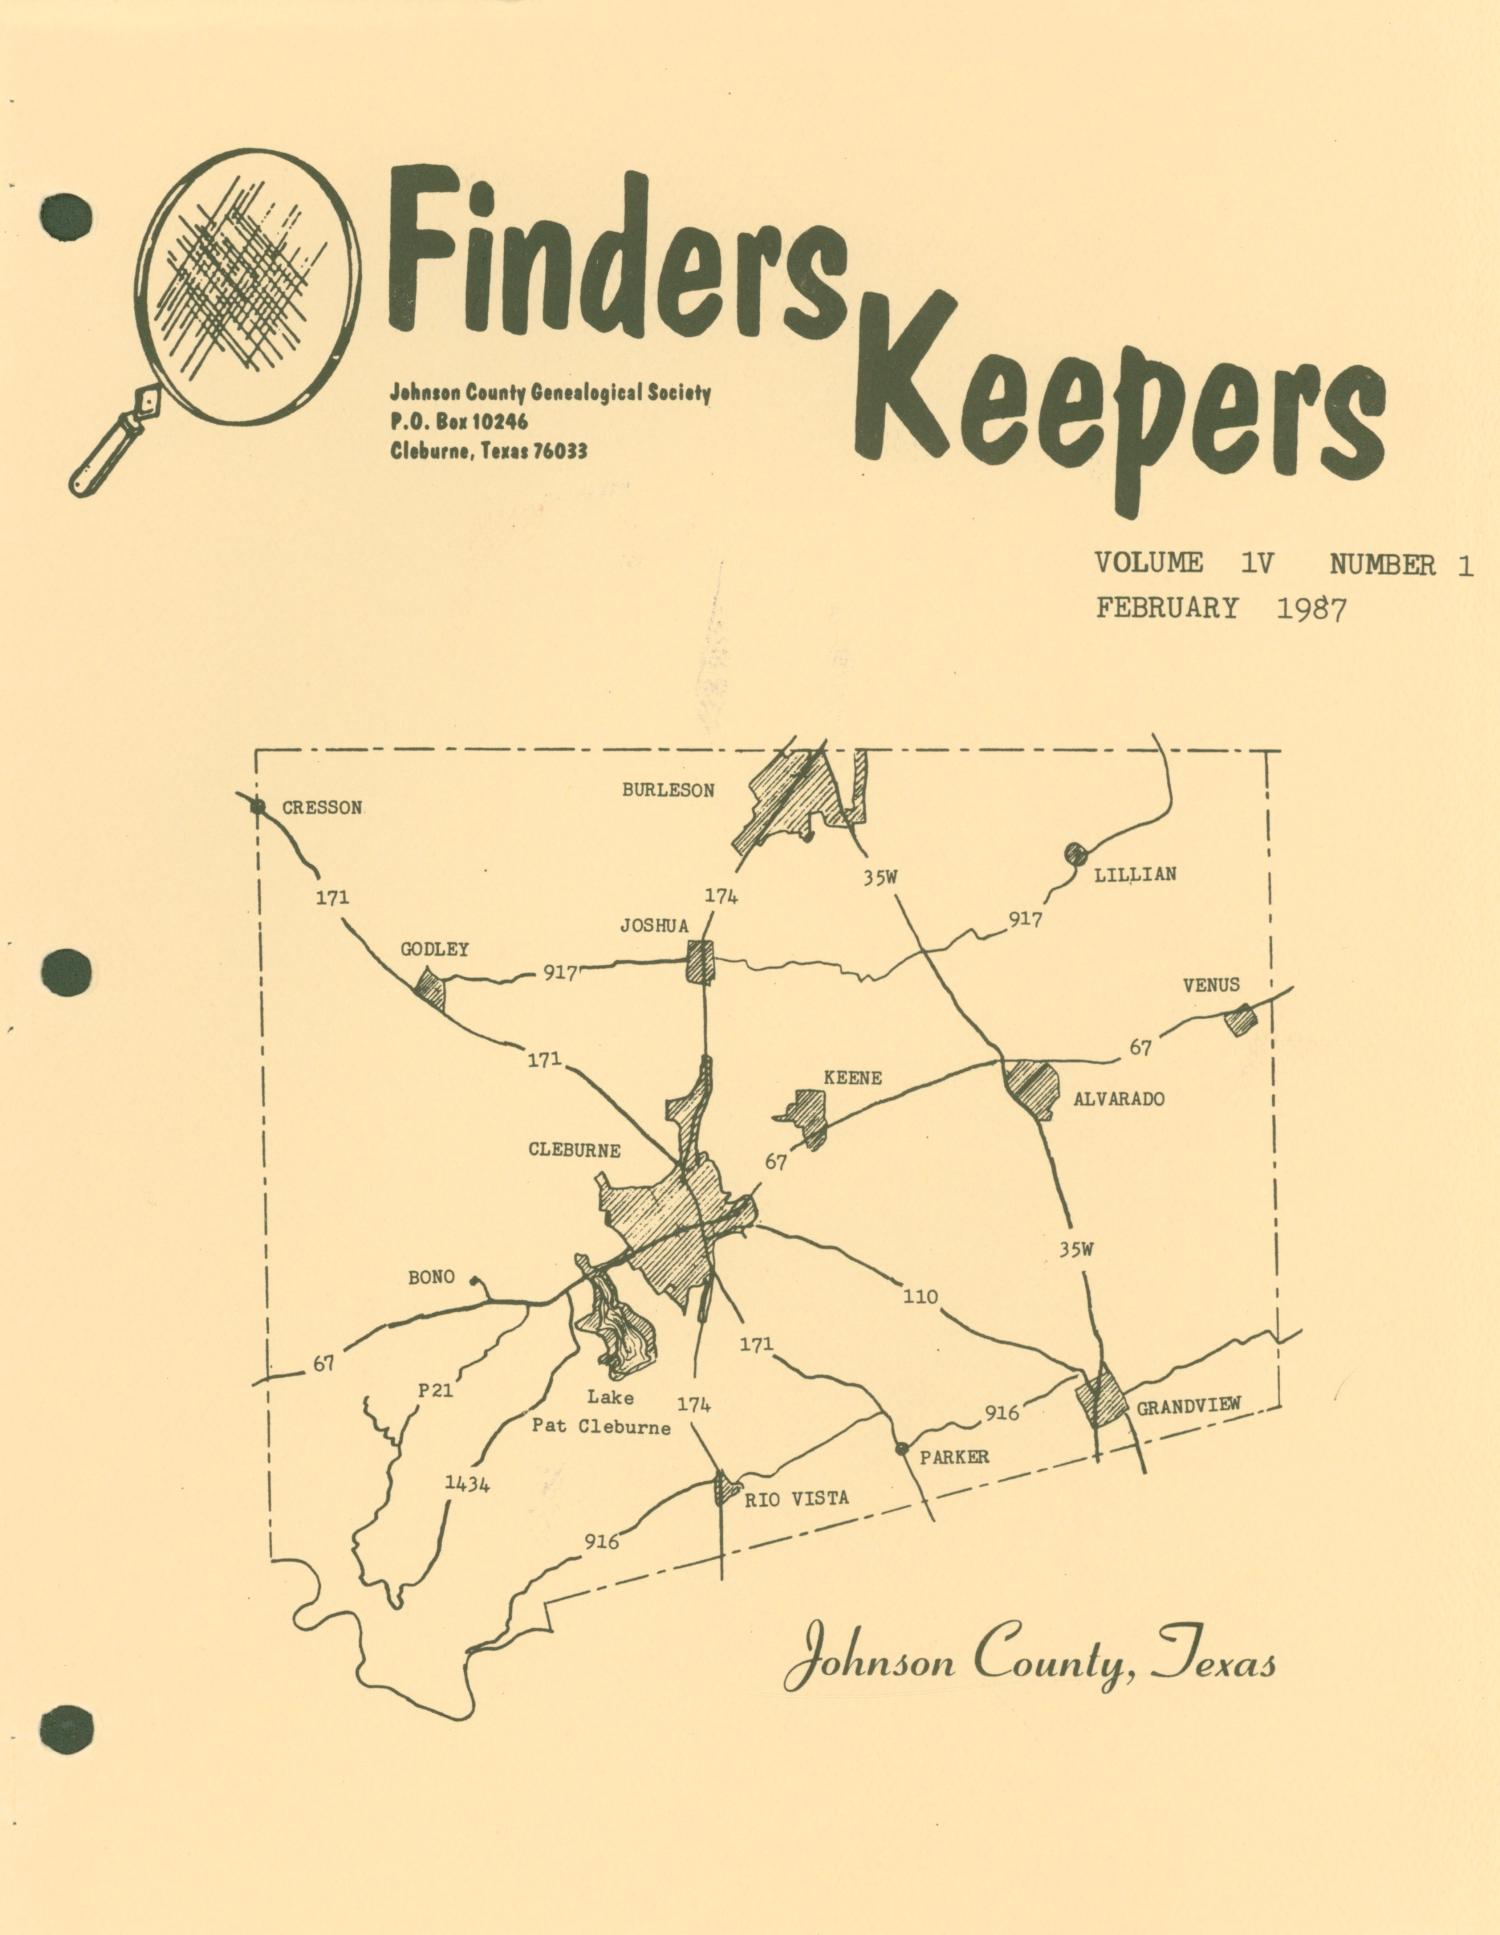 Finders Keepers, Volume 4, Number 1, February 1987
                                                
                                                    Front Cover
                                                